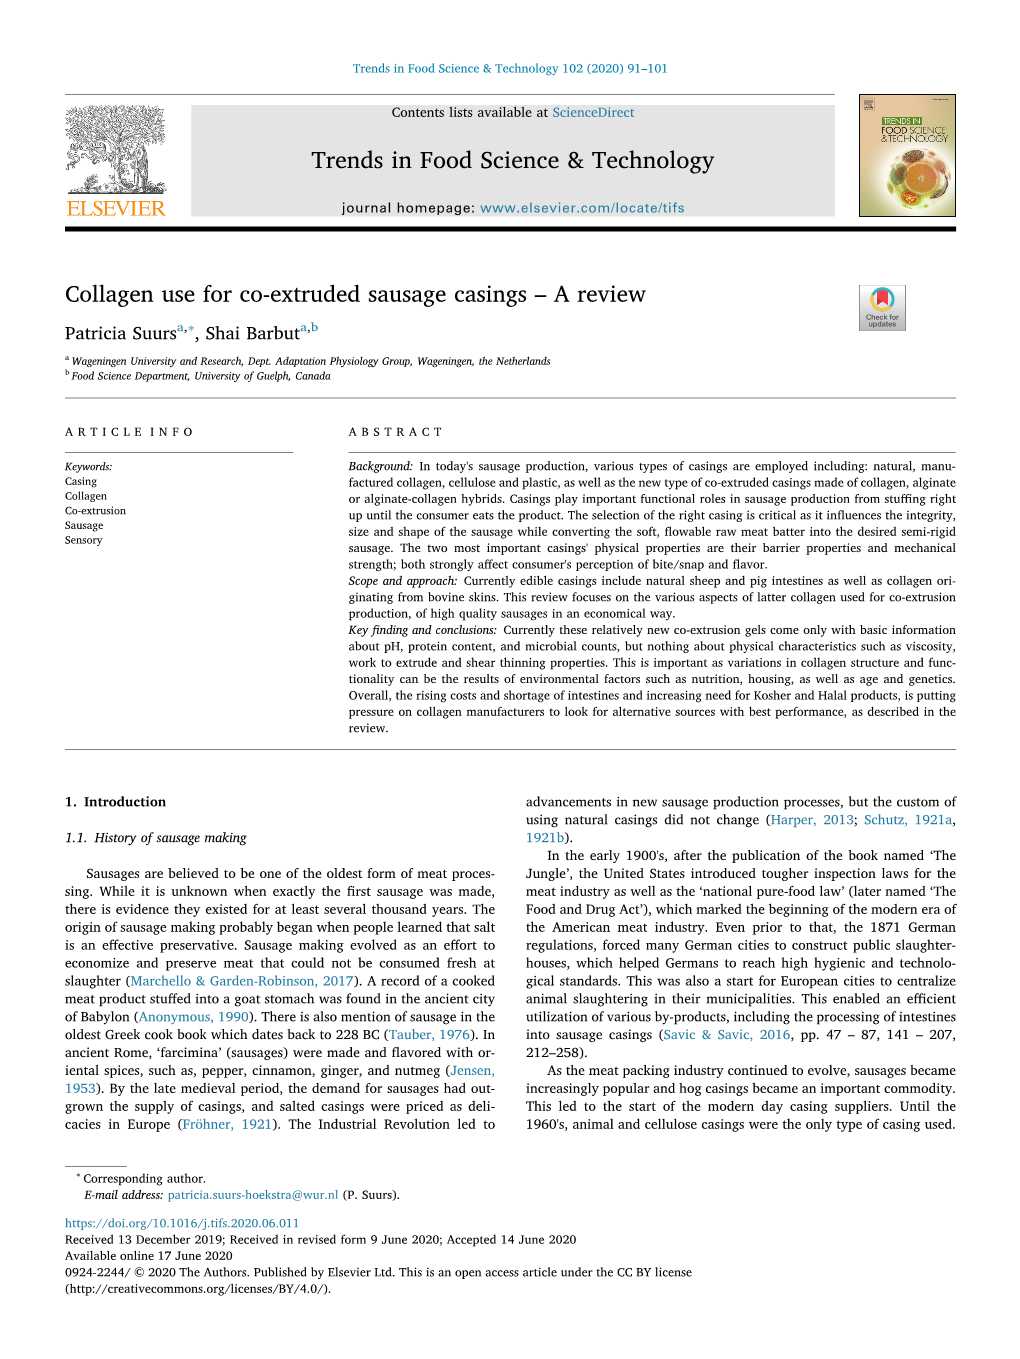 Collagen Use for Co-Extruded Sausage Casings – a Review T ∗ Patricia Suursa, , Shai Barbuta,B a Wageningen University and Research, Dept